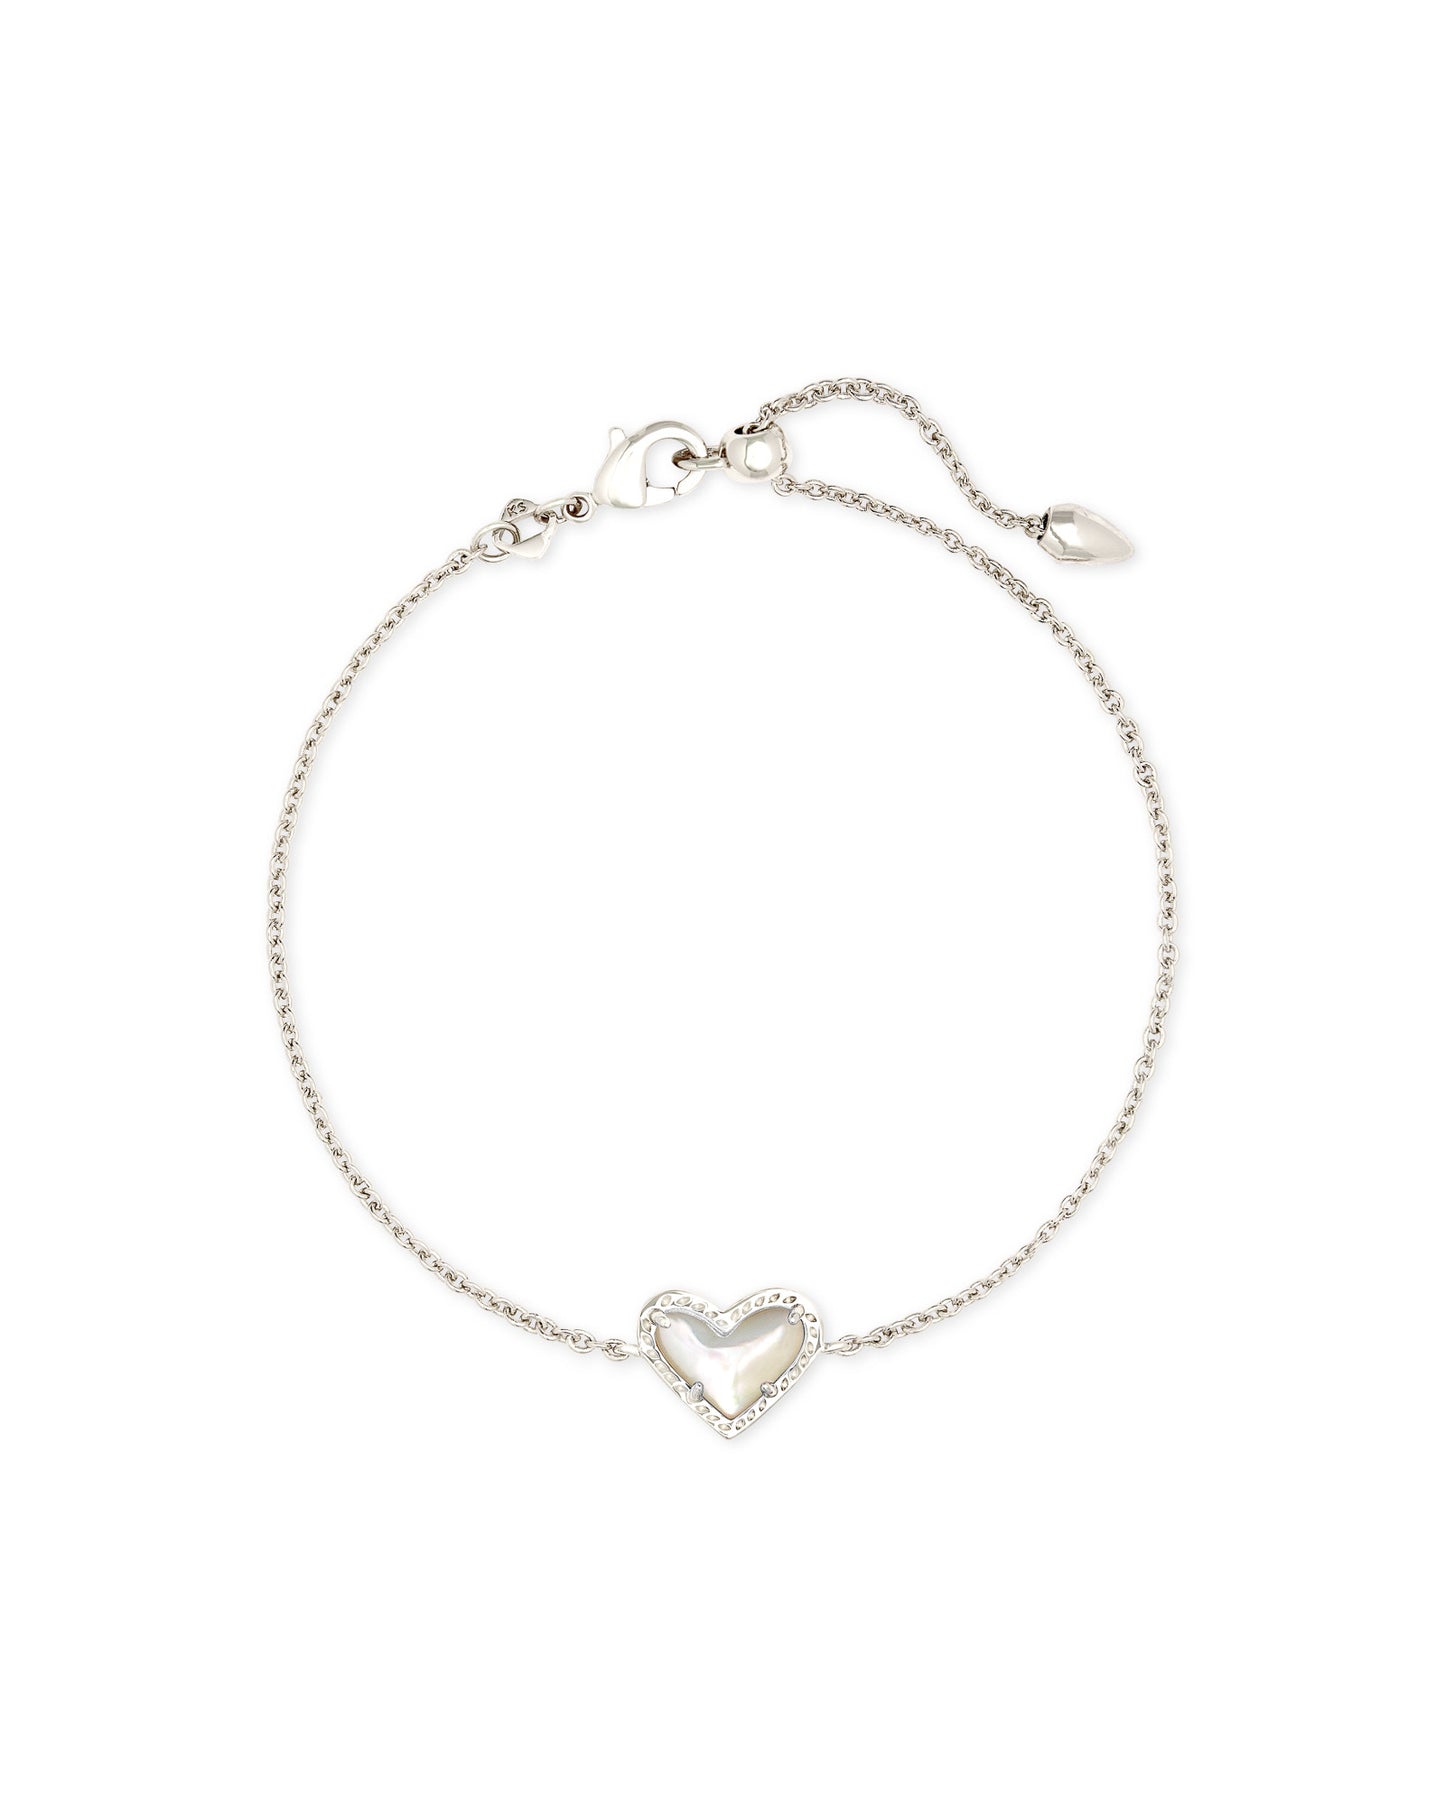 Ari Heart Delicate Bracelet in Rhodium Ivory Mother of Pearl | KENDRA SCOTT - The Street Boutique 